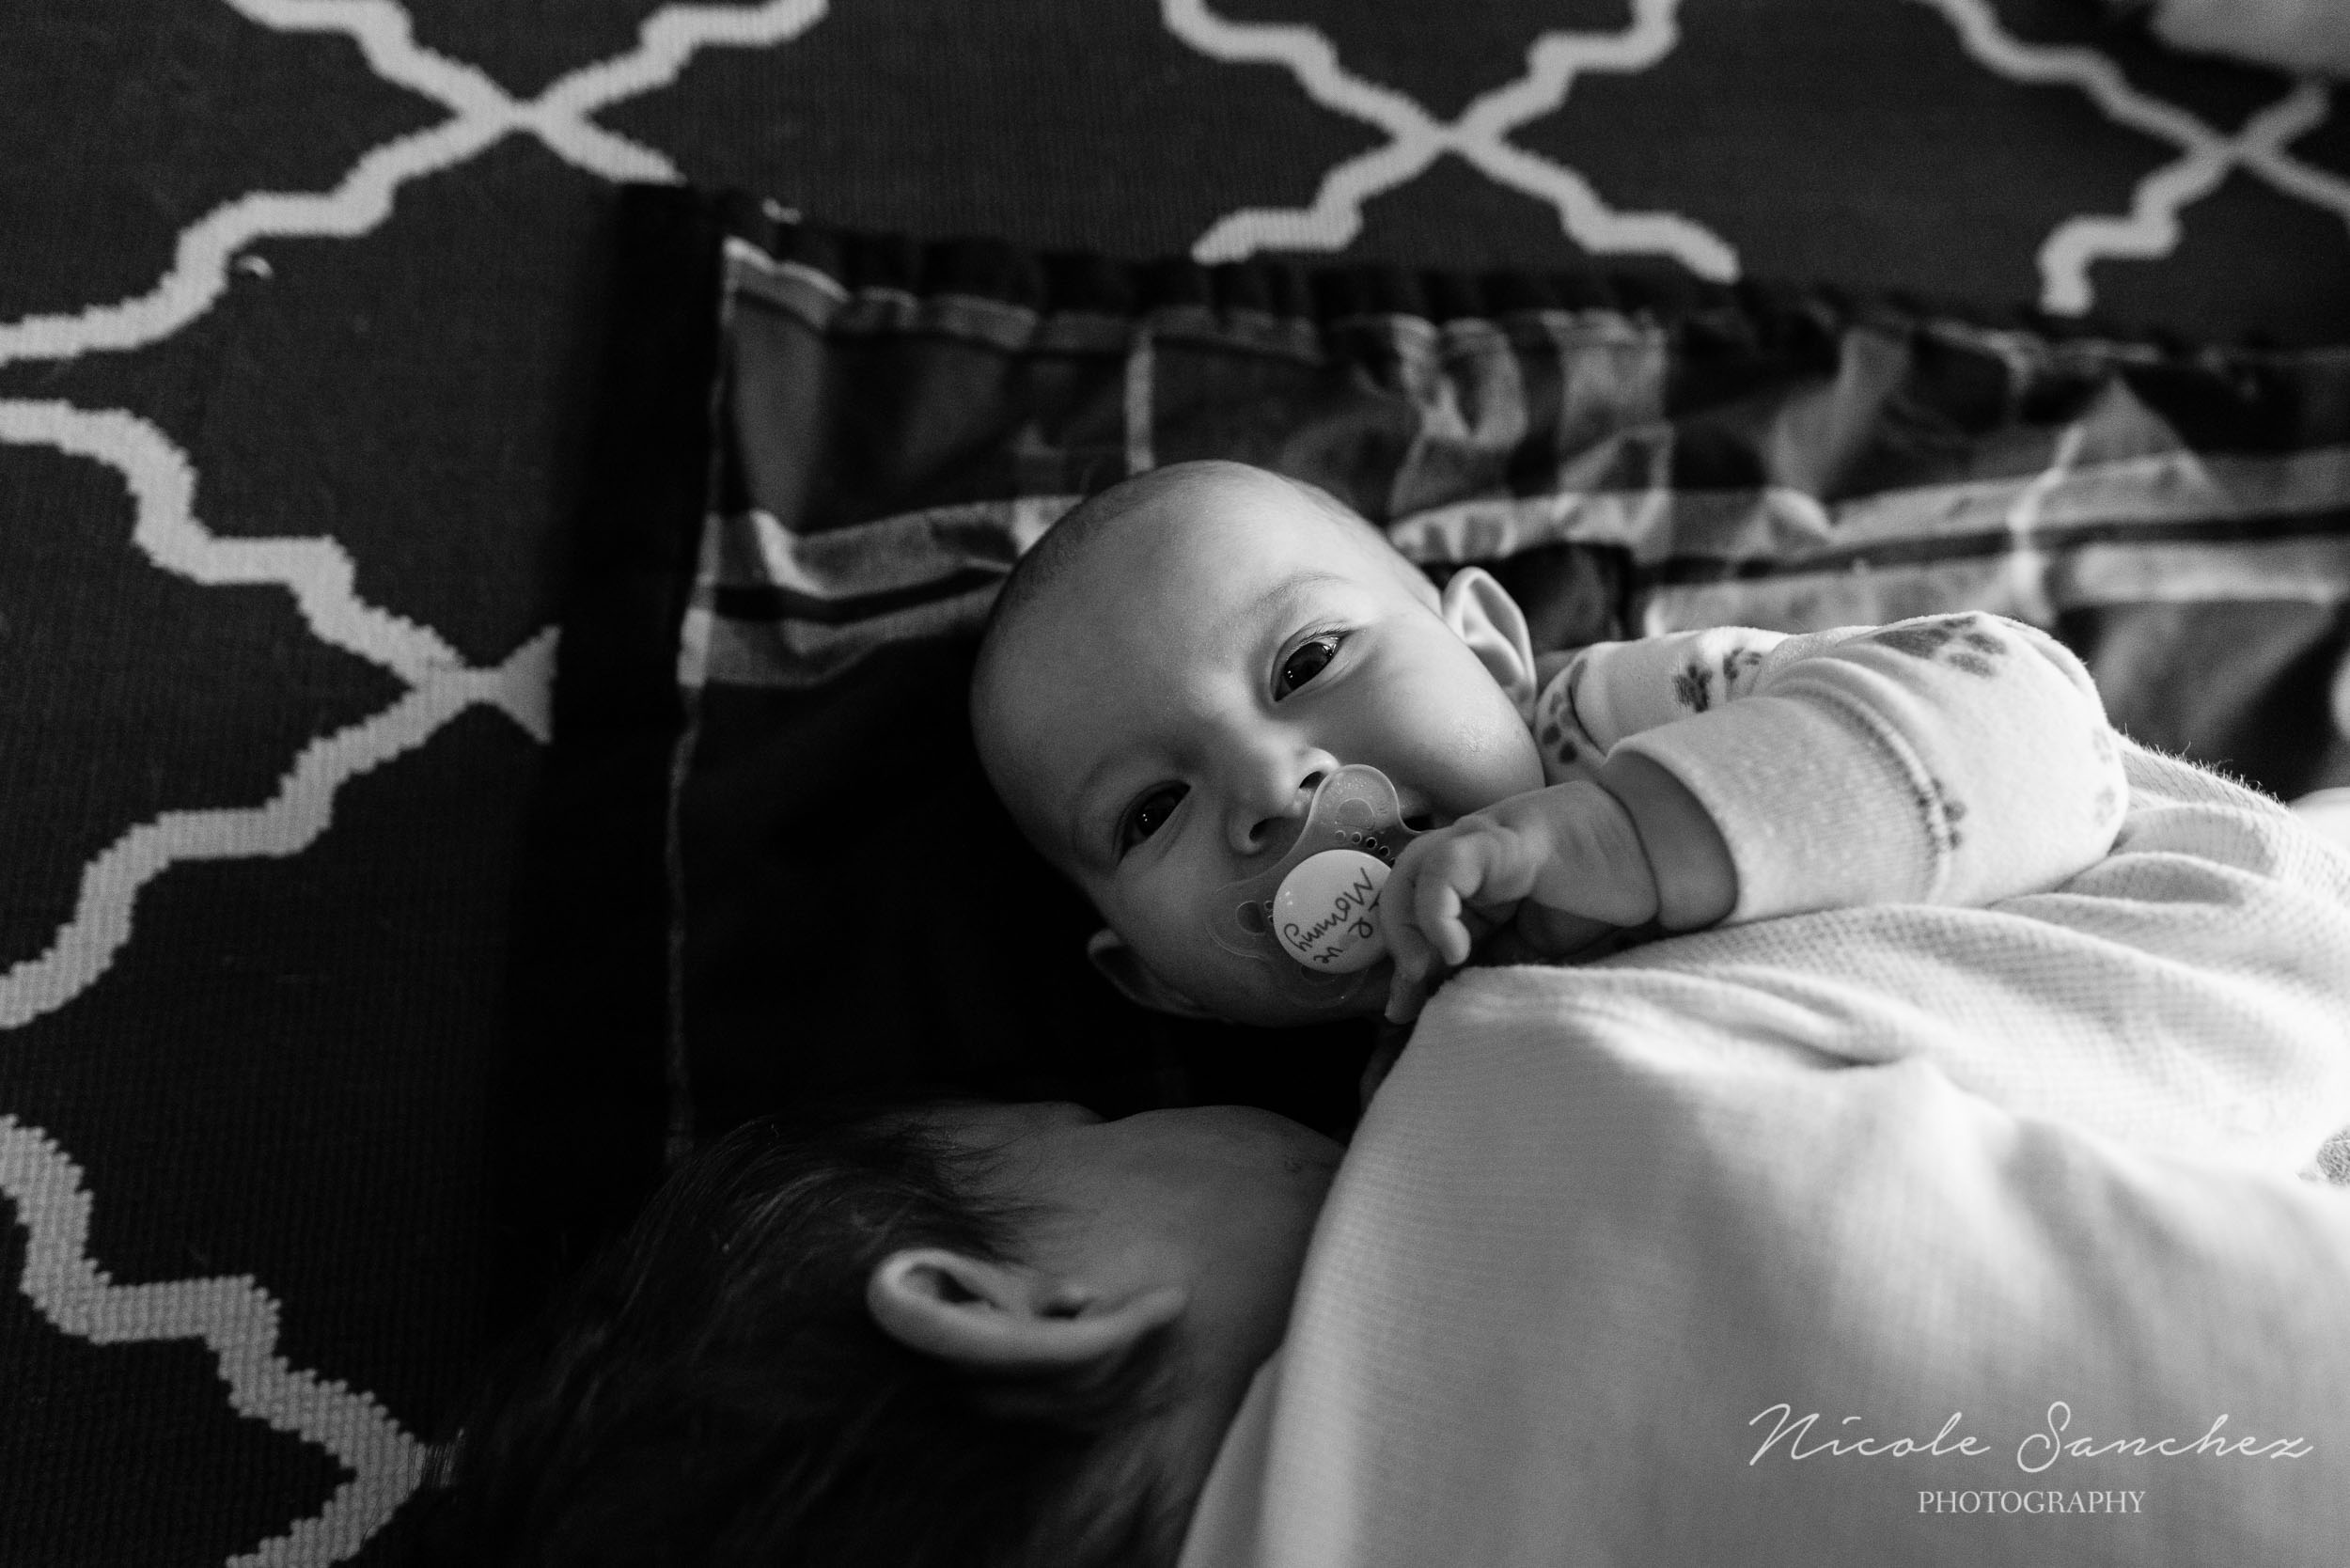 Baby boy smiling with pacifier in mouth by Northern Virginia Lifestyle Photographer Nicole Sanchez